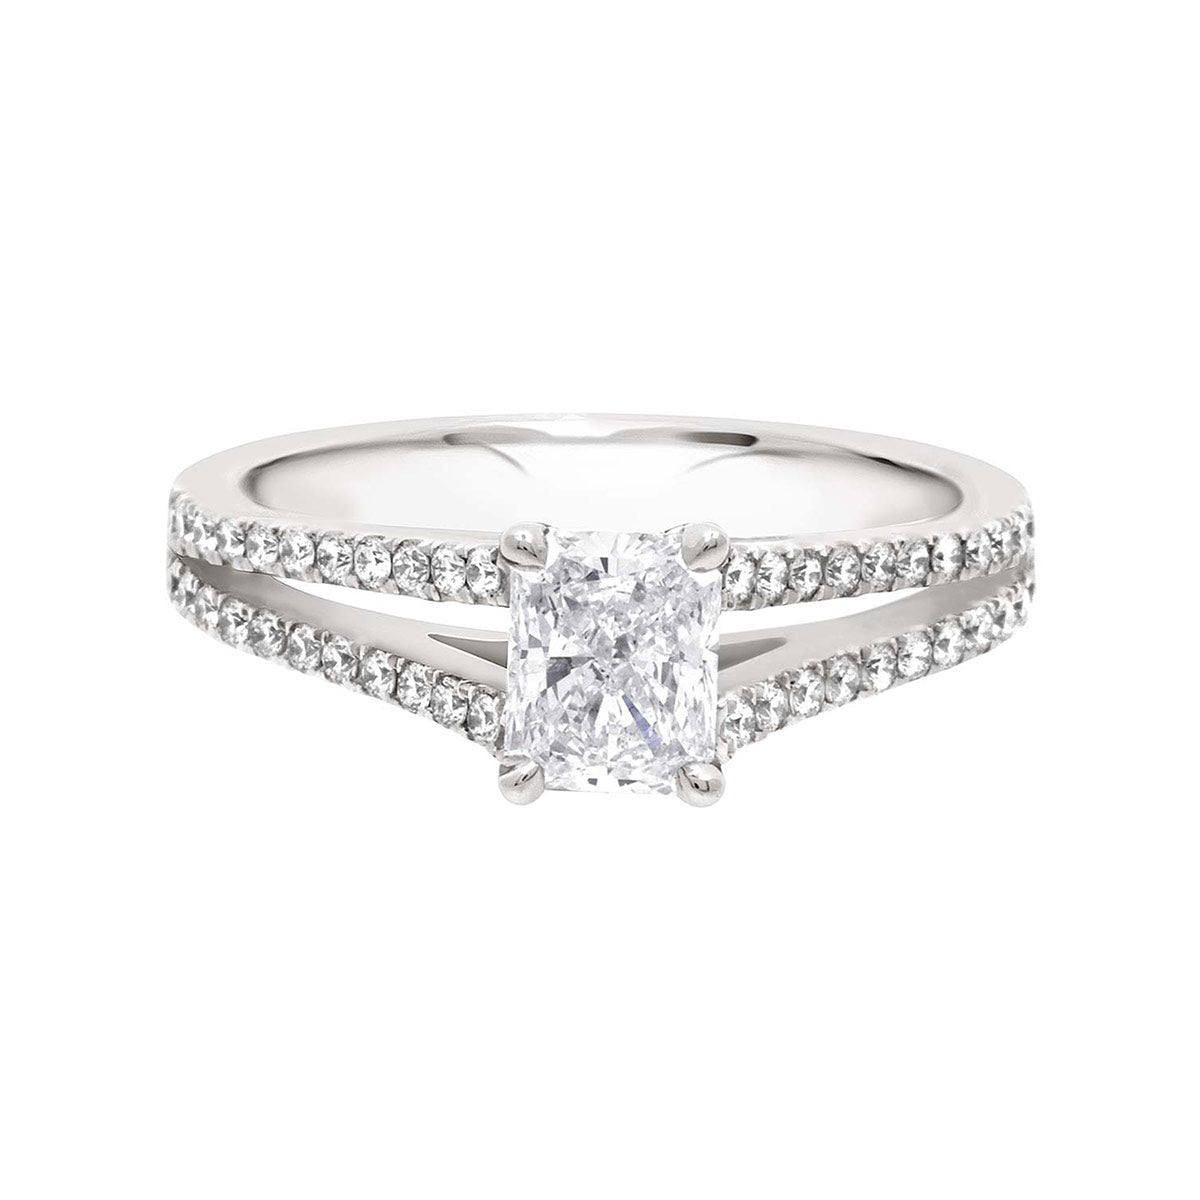 Radiant Cut Engagement ring in White Gold